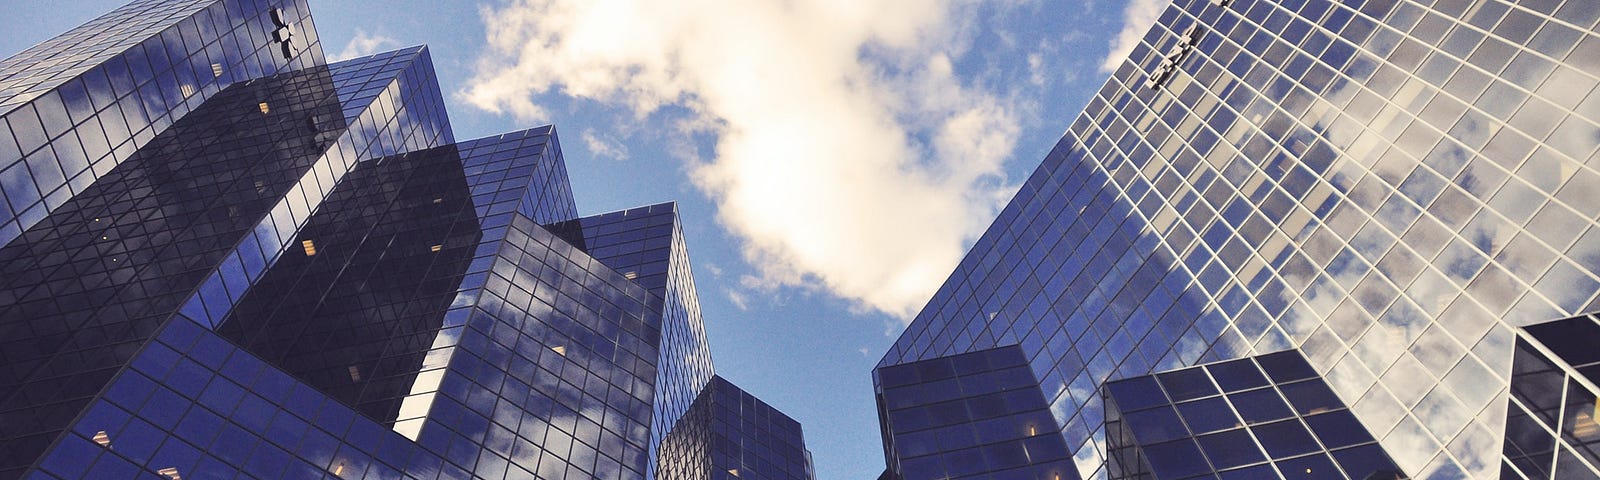 glass-paneled skyscrapers below a blue sky with clouds